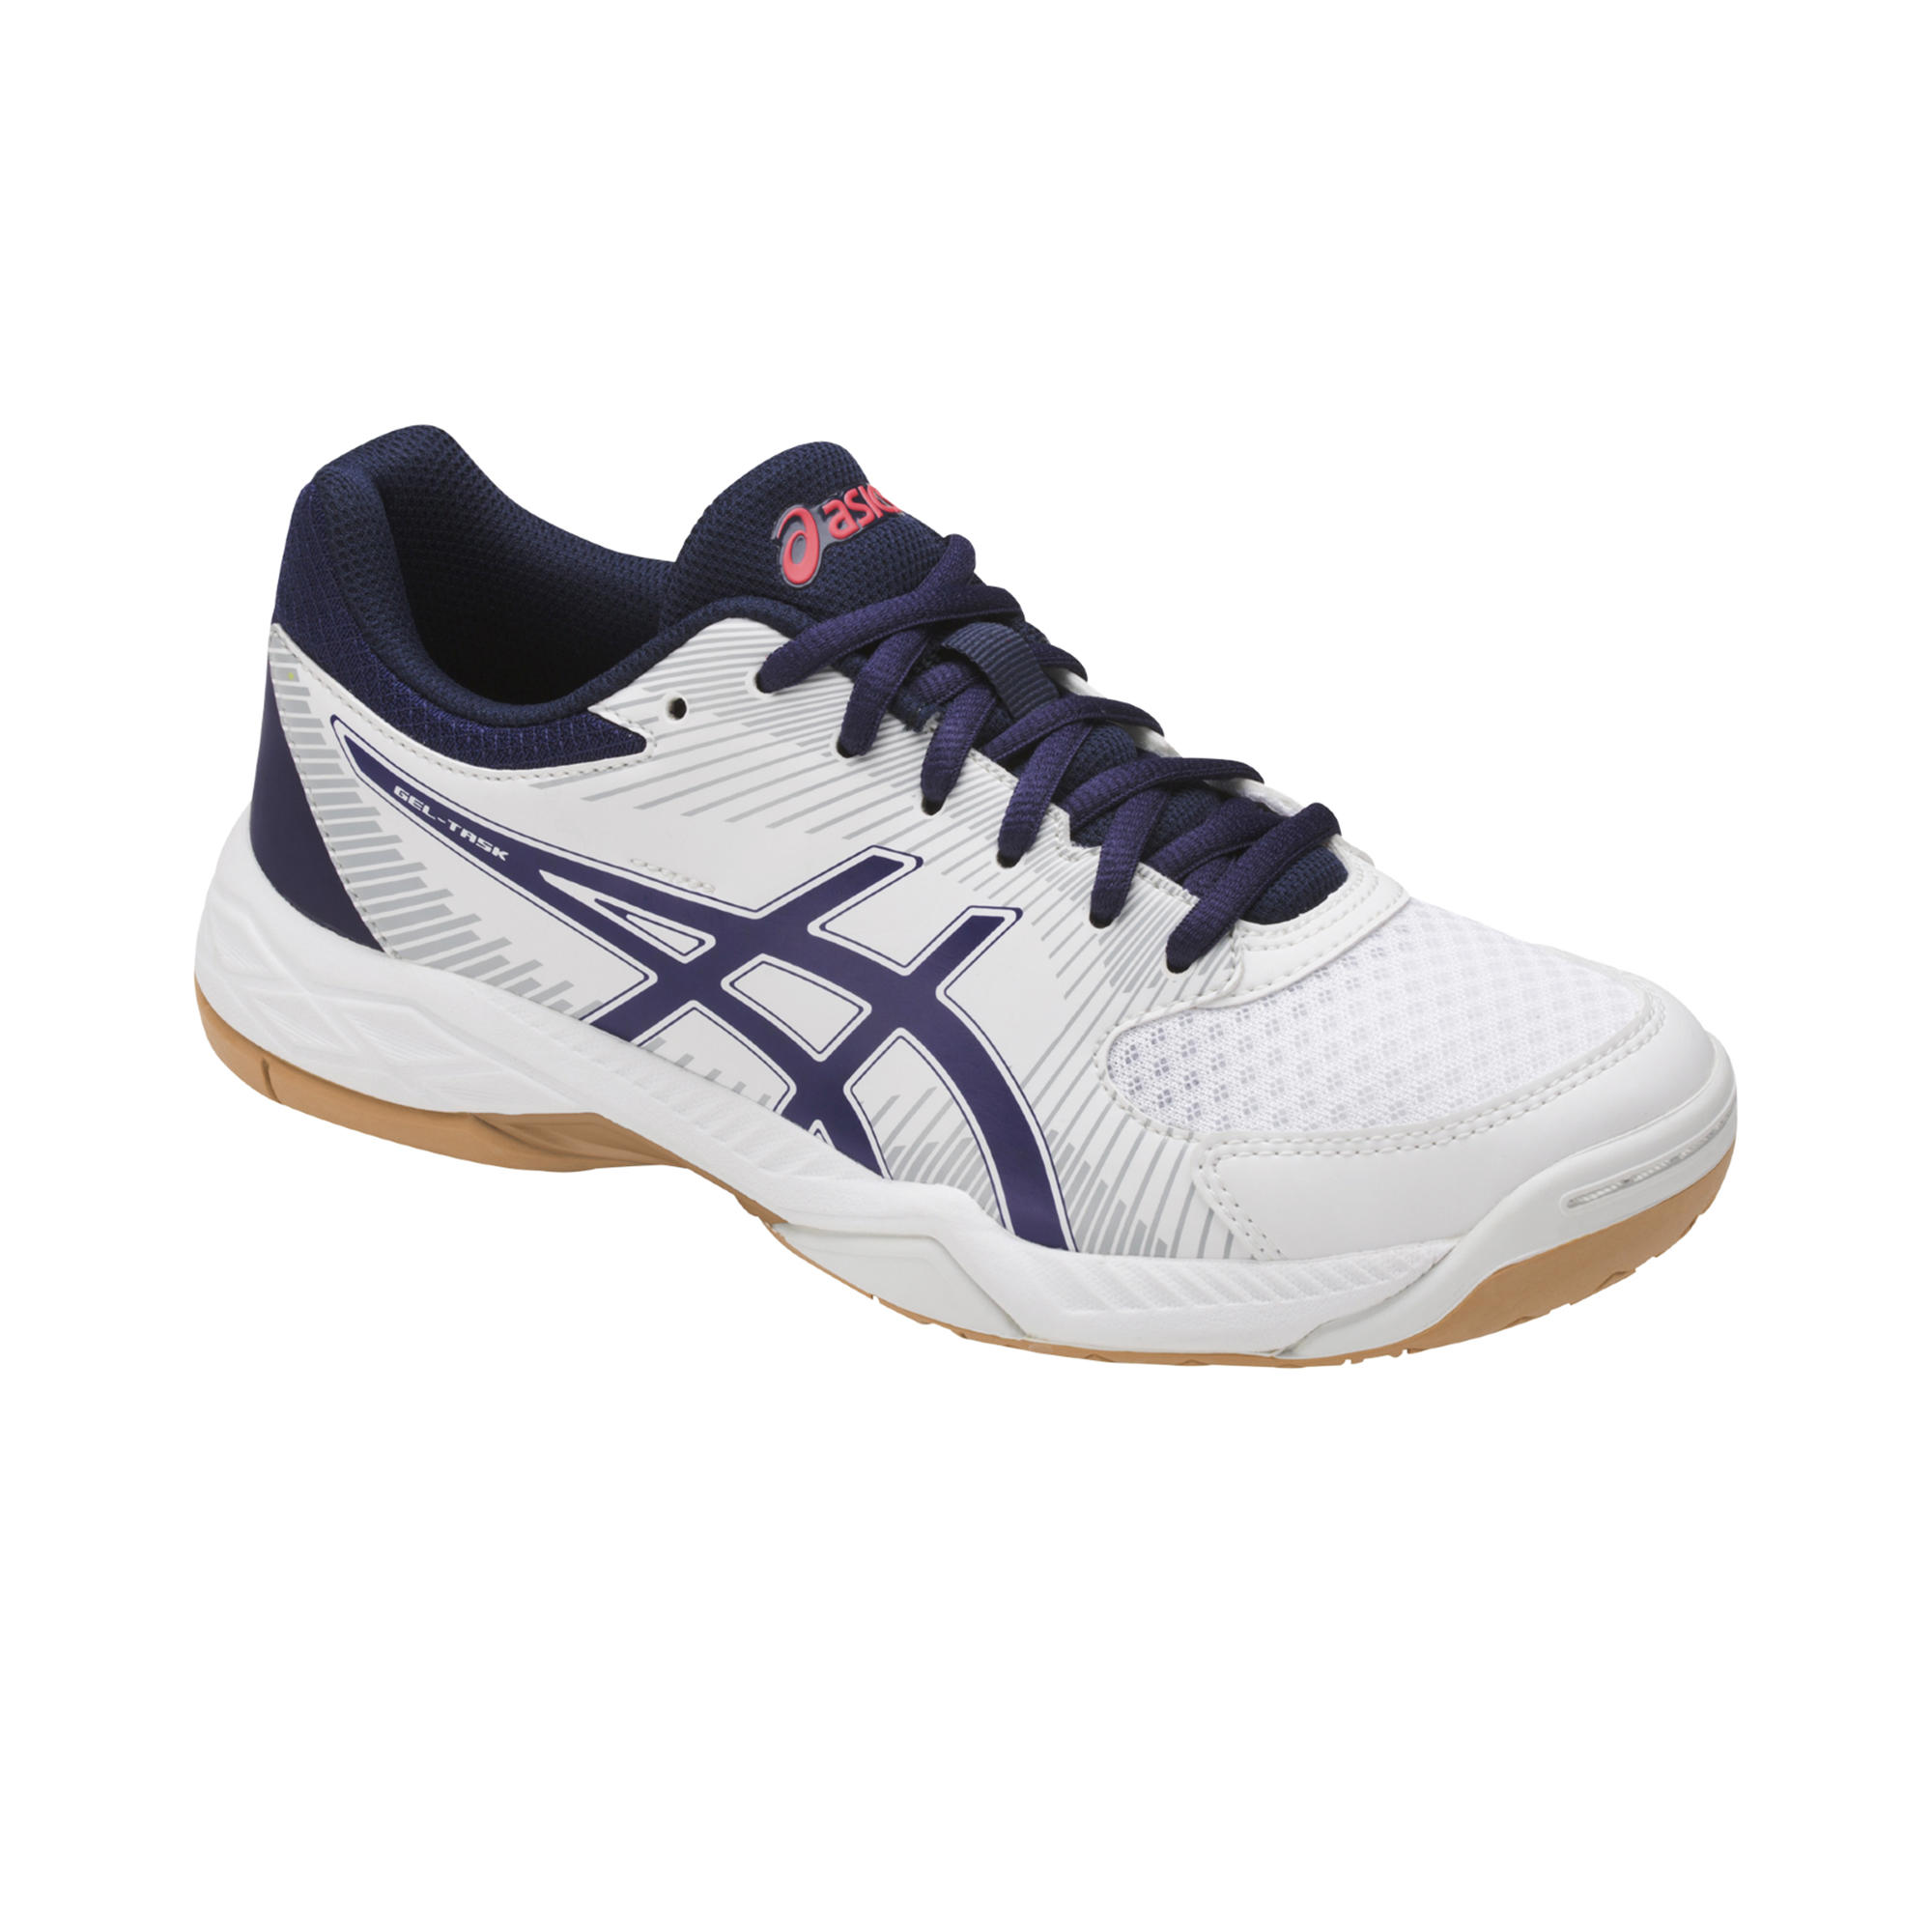 ASICS Gel Task Women's Volleyball Shoes 